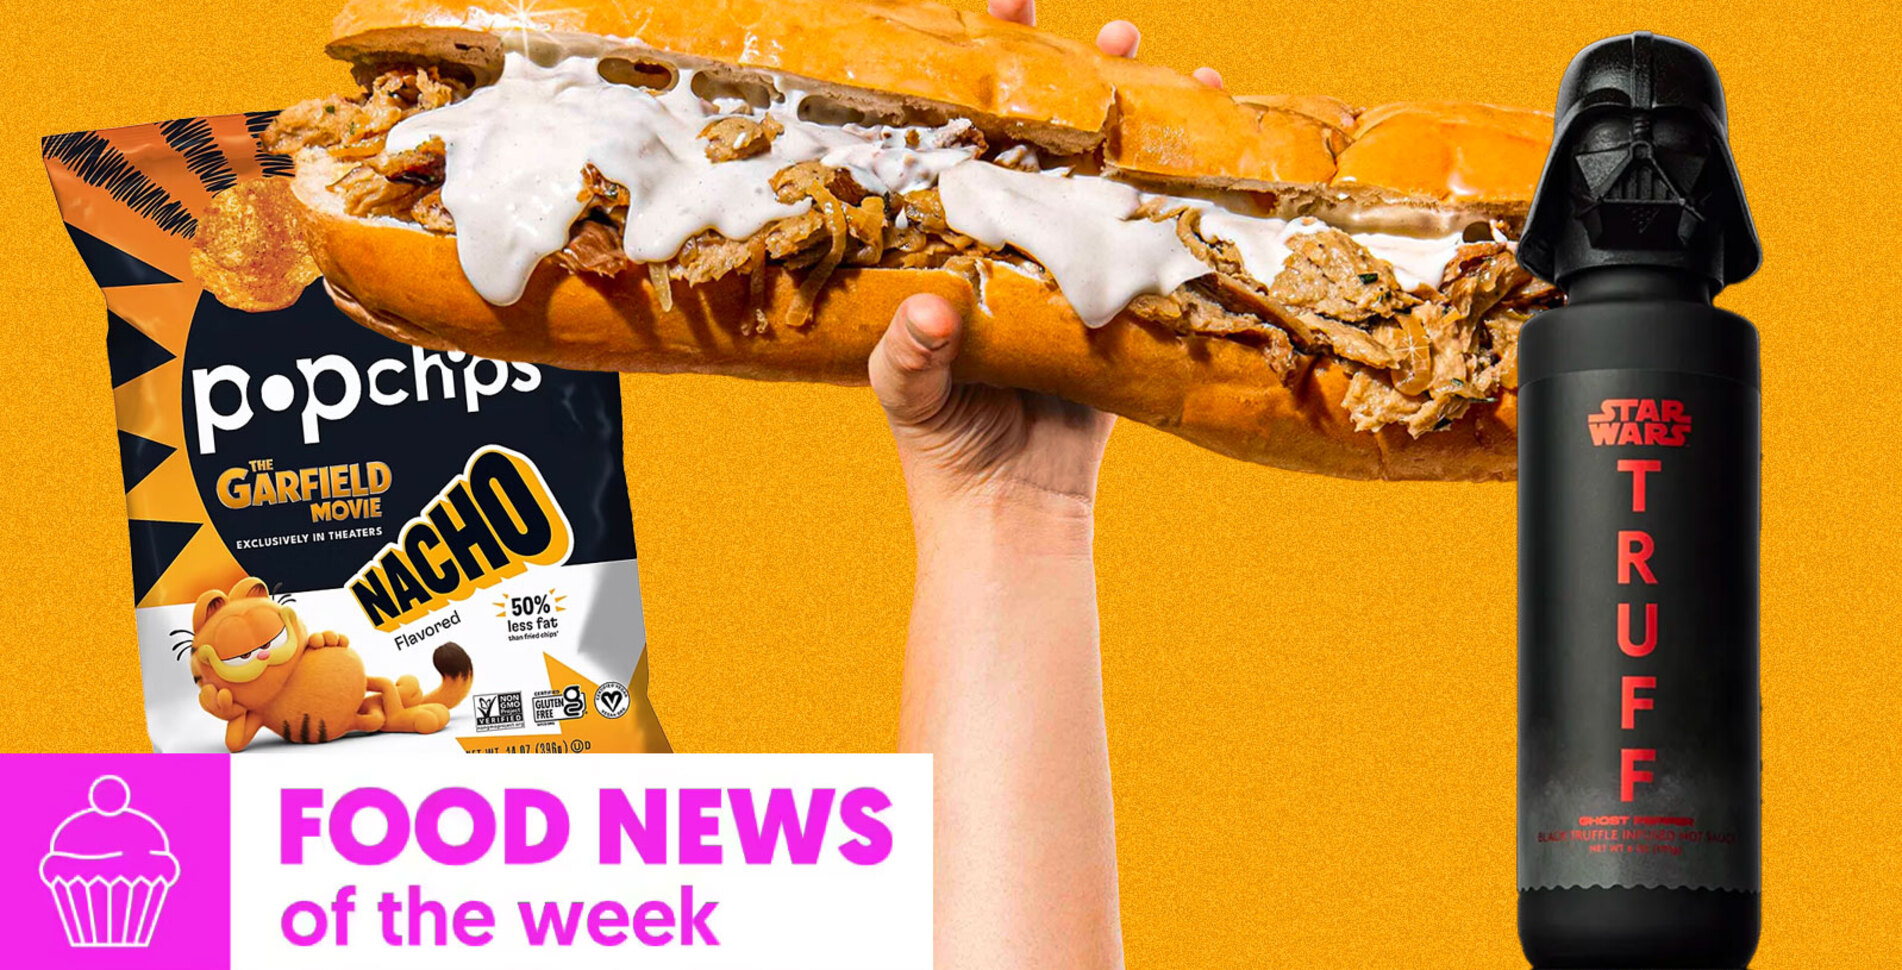 Food News of the Week: Darth Vader Hot Sauce, Philly Cheesesteak Pizza, and Garfield’s Nacho Chips